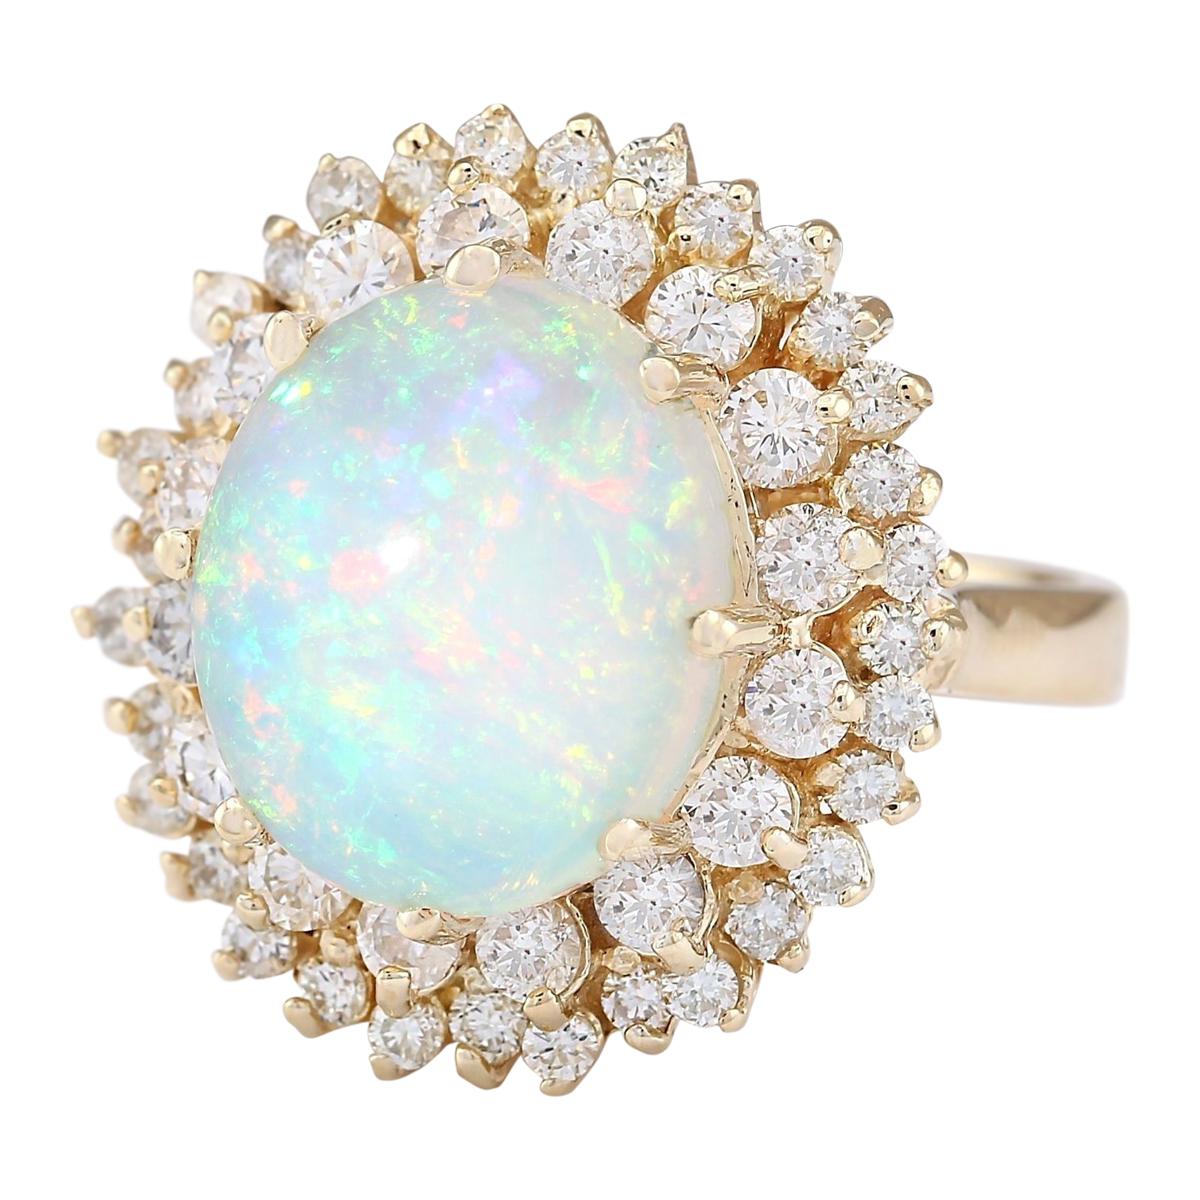 Stamped: 14K Yellow Gold
Total Ring Weight: 9.1 Grams
Total Natural Opal Weight is 5.50 Carat (Measures: 14.00x10.00 mm)
Color: Multicolor
Total Natural Diamond Weight is 1.70 Carat
Color: F-G, Clarity: VS2-SI1
Face Measures: 21.65x20.25 mm
Sku: